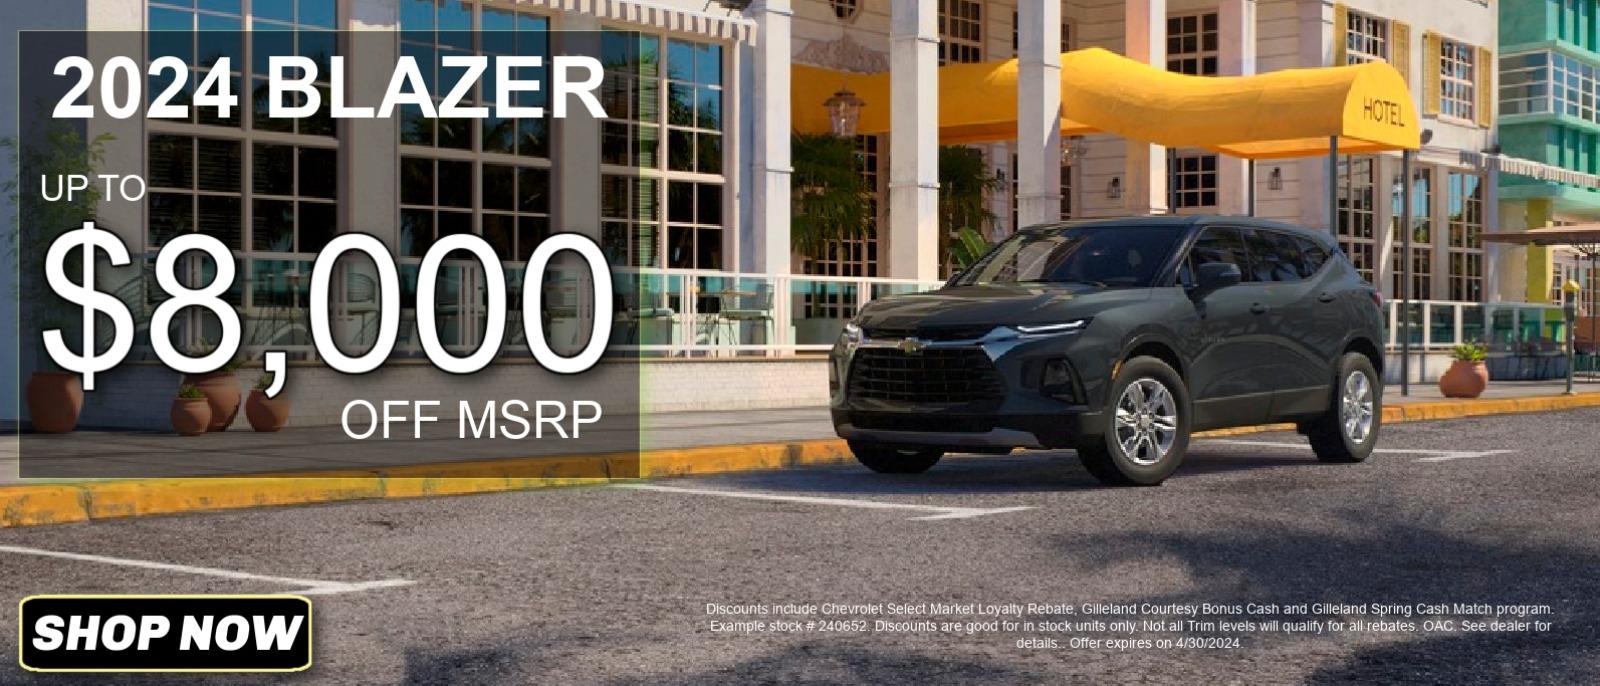 2024 Chevy Blazer - Up to $8,000 off MSRP